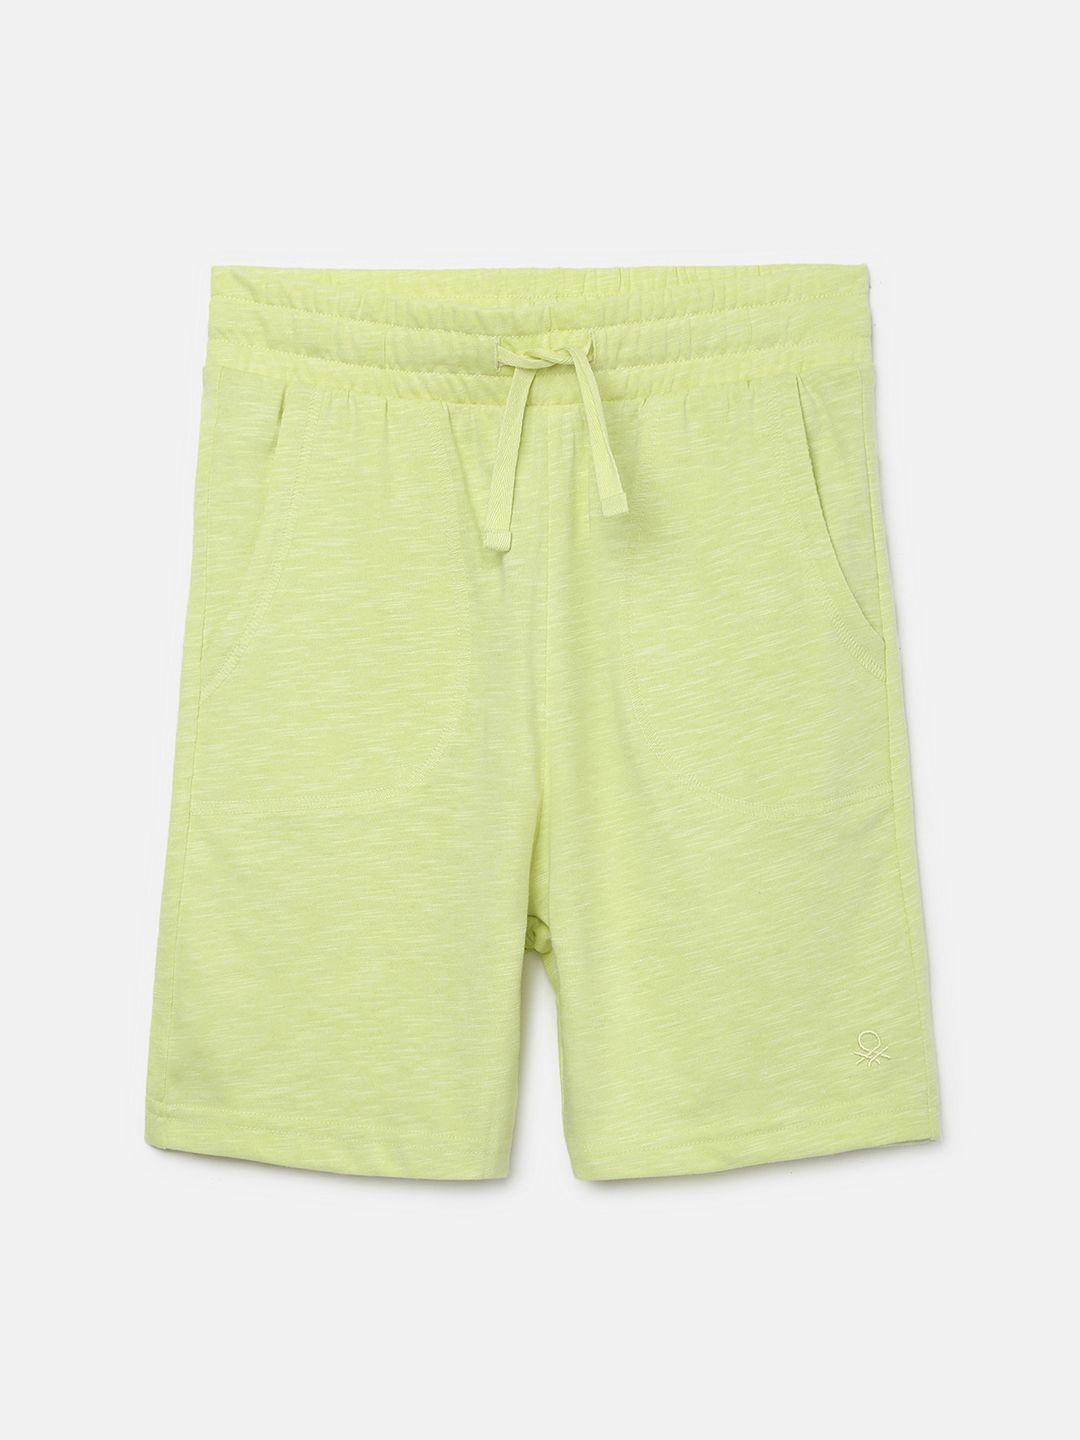 united colors of benetton boys mid-rise shorts